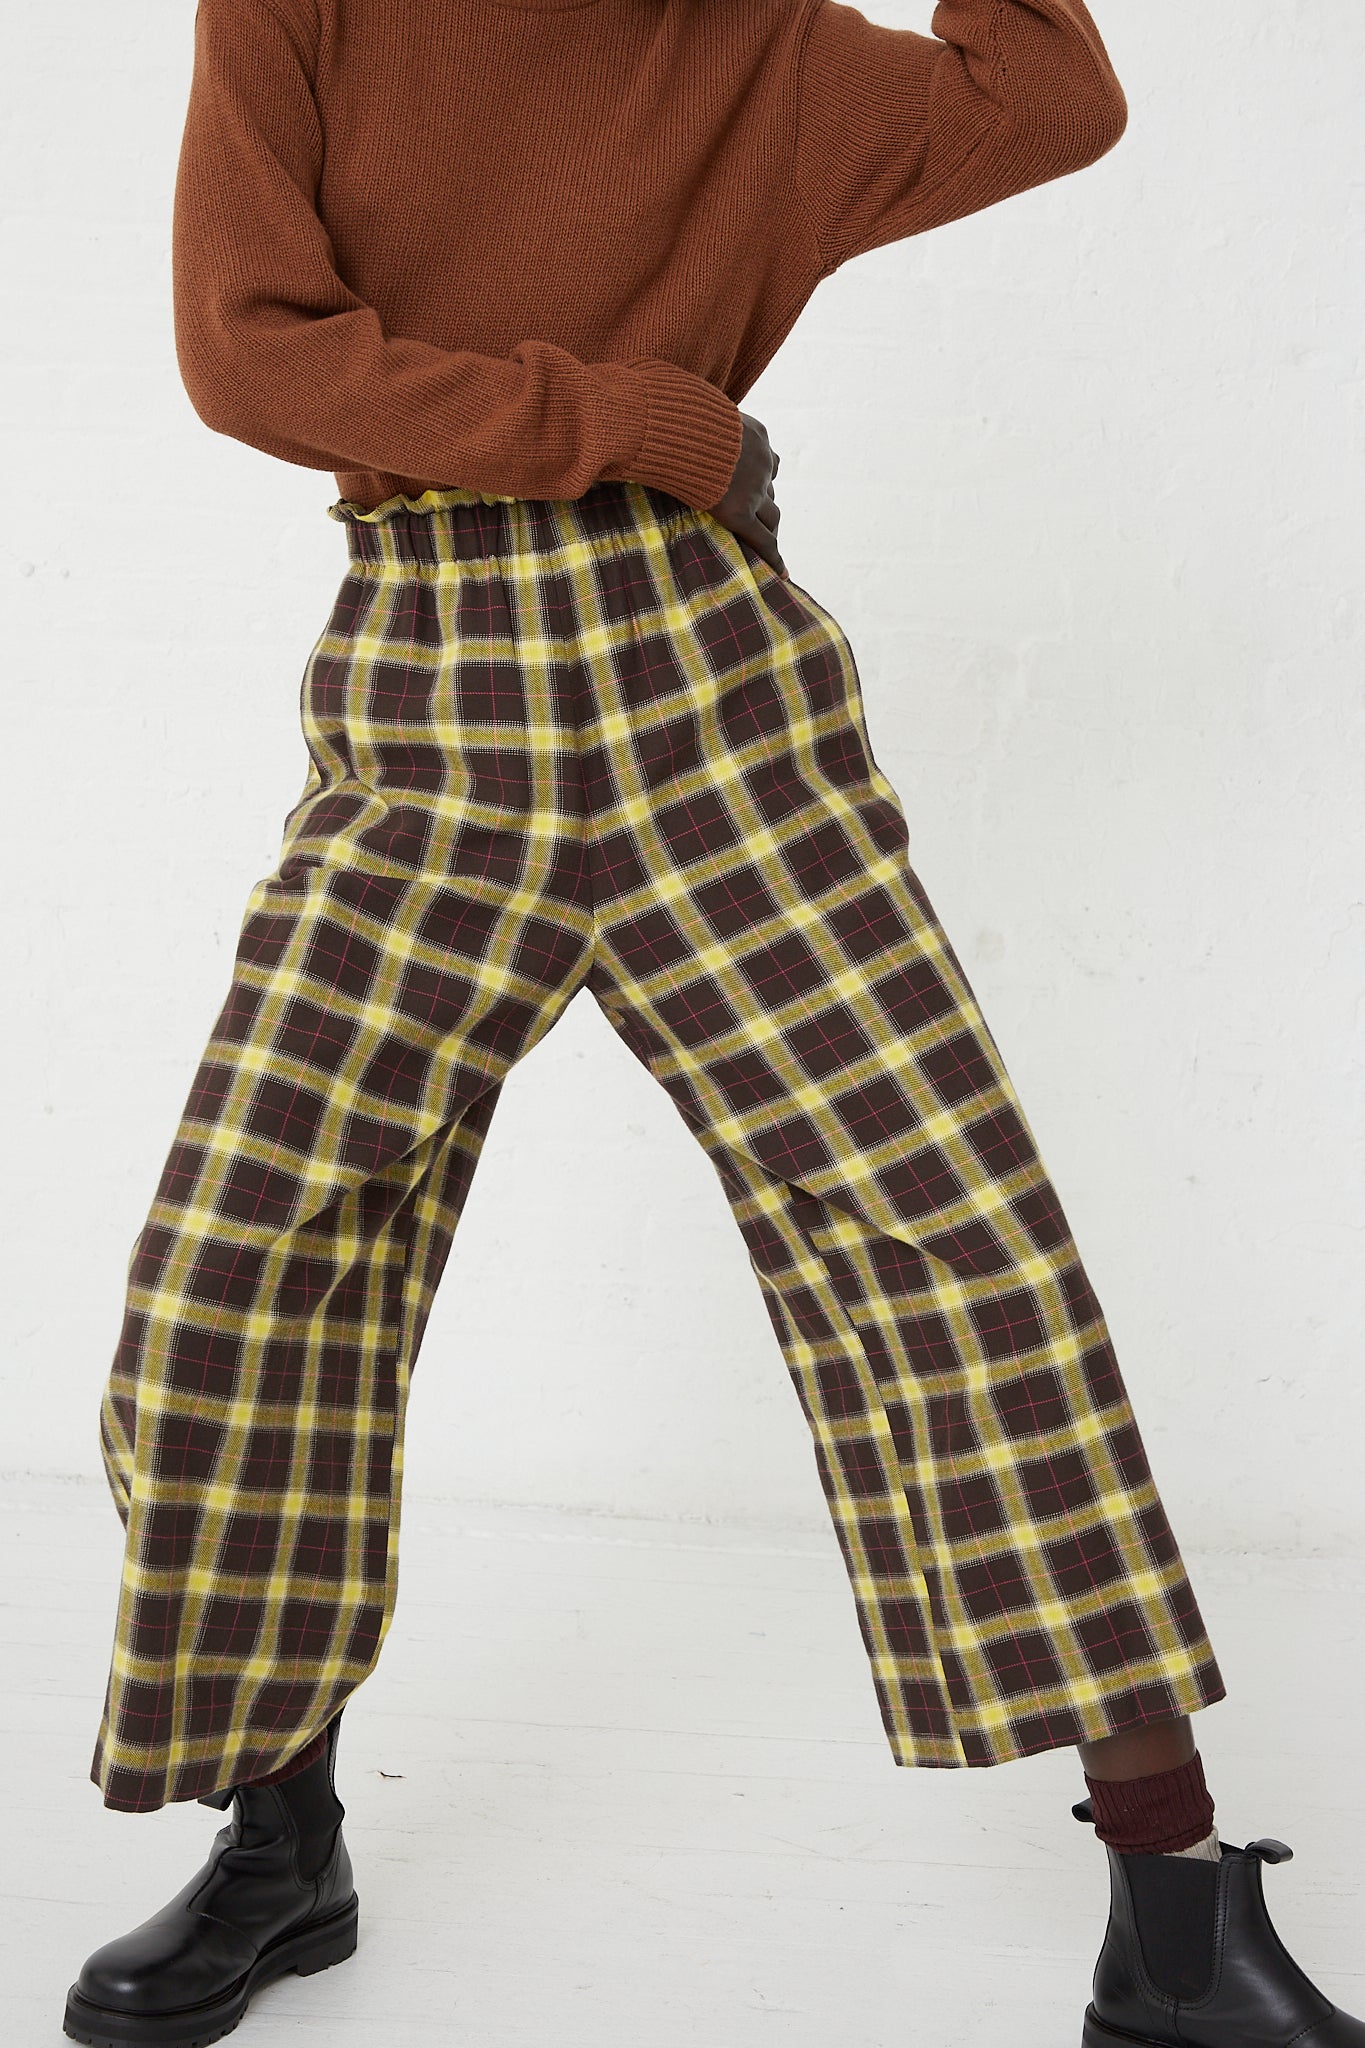 A woman wearing a brown sweater and AVN Easy Pant in Check Brown, Yellow and Pink with a relaxed fit.